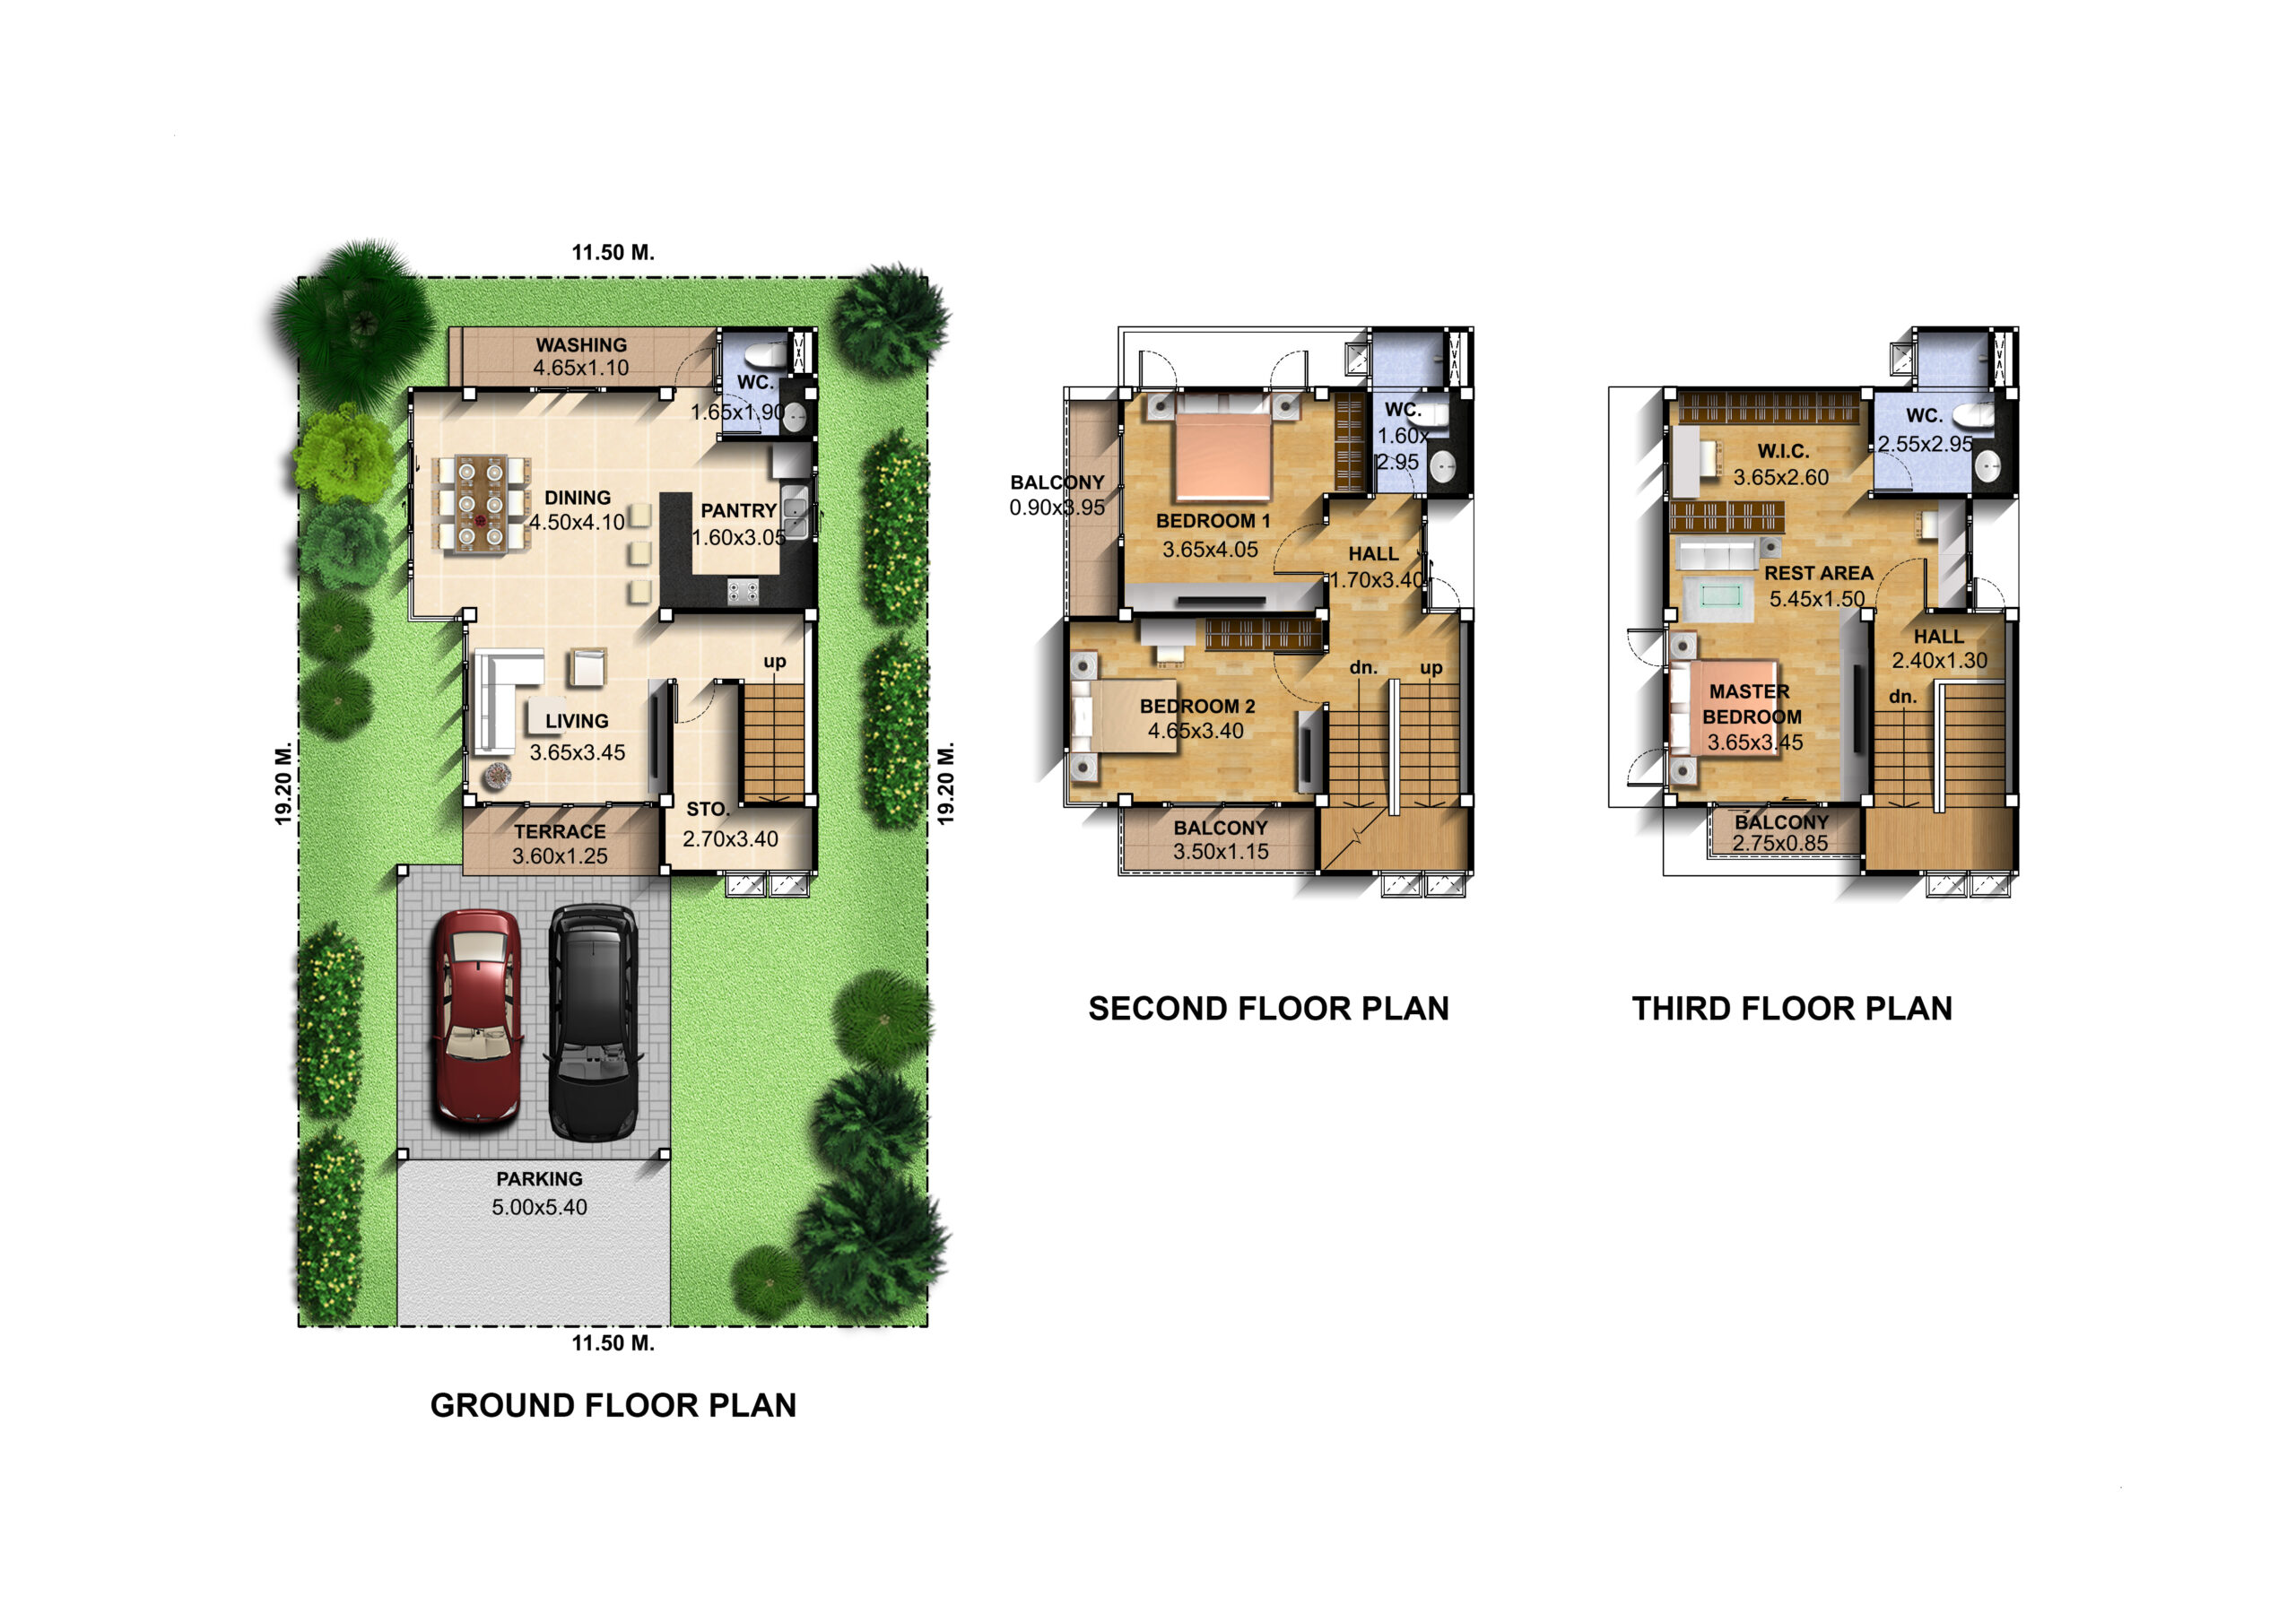 Small-House-Design-7.5x14-Meter-with-3-Bedrooms-Layout-floor-plan-Copy